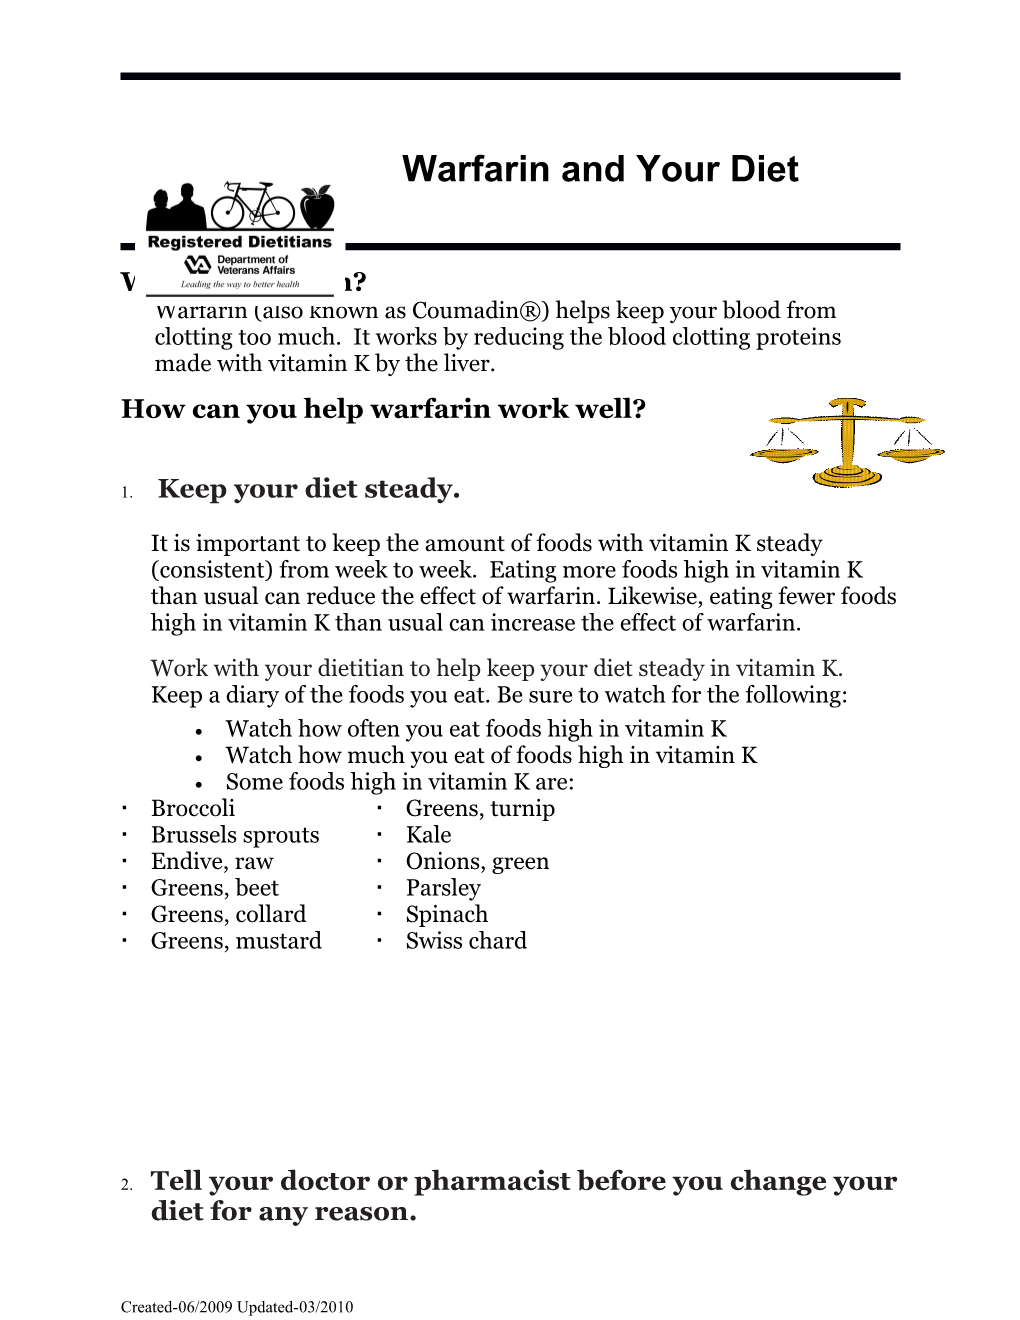 Warfarin and Your Diet